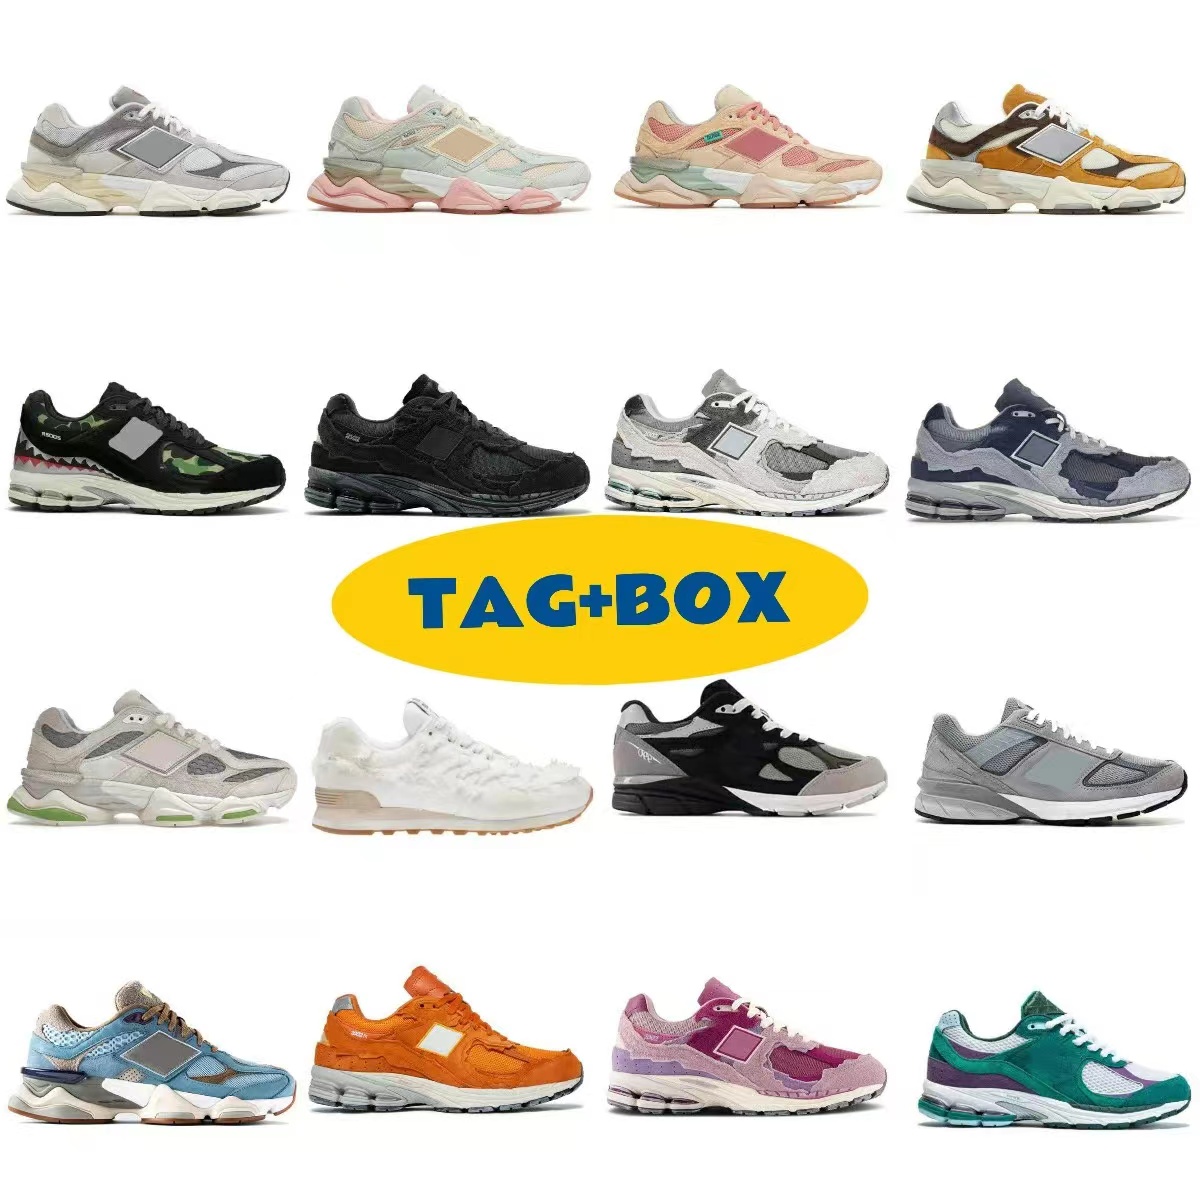 The highest quality low-top sneakers are made of the highest quality materials 11dupe features anti-fouling features in a variety of colors